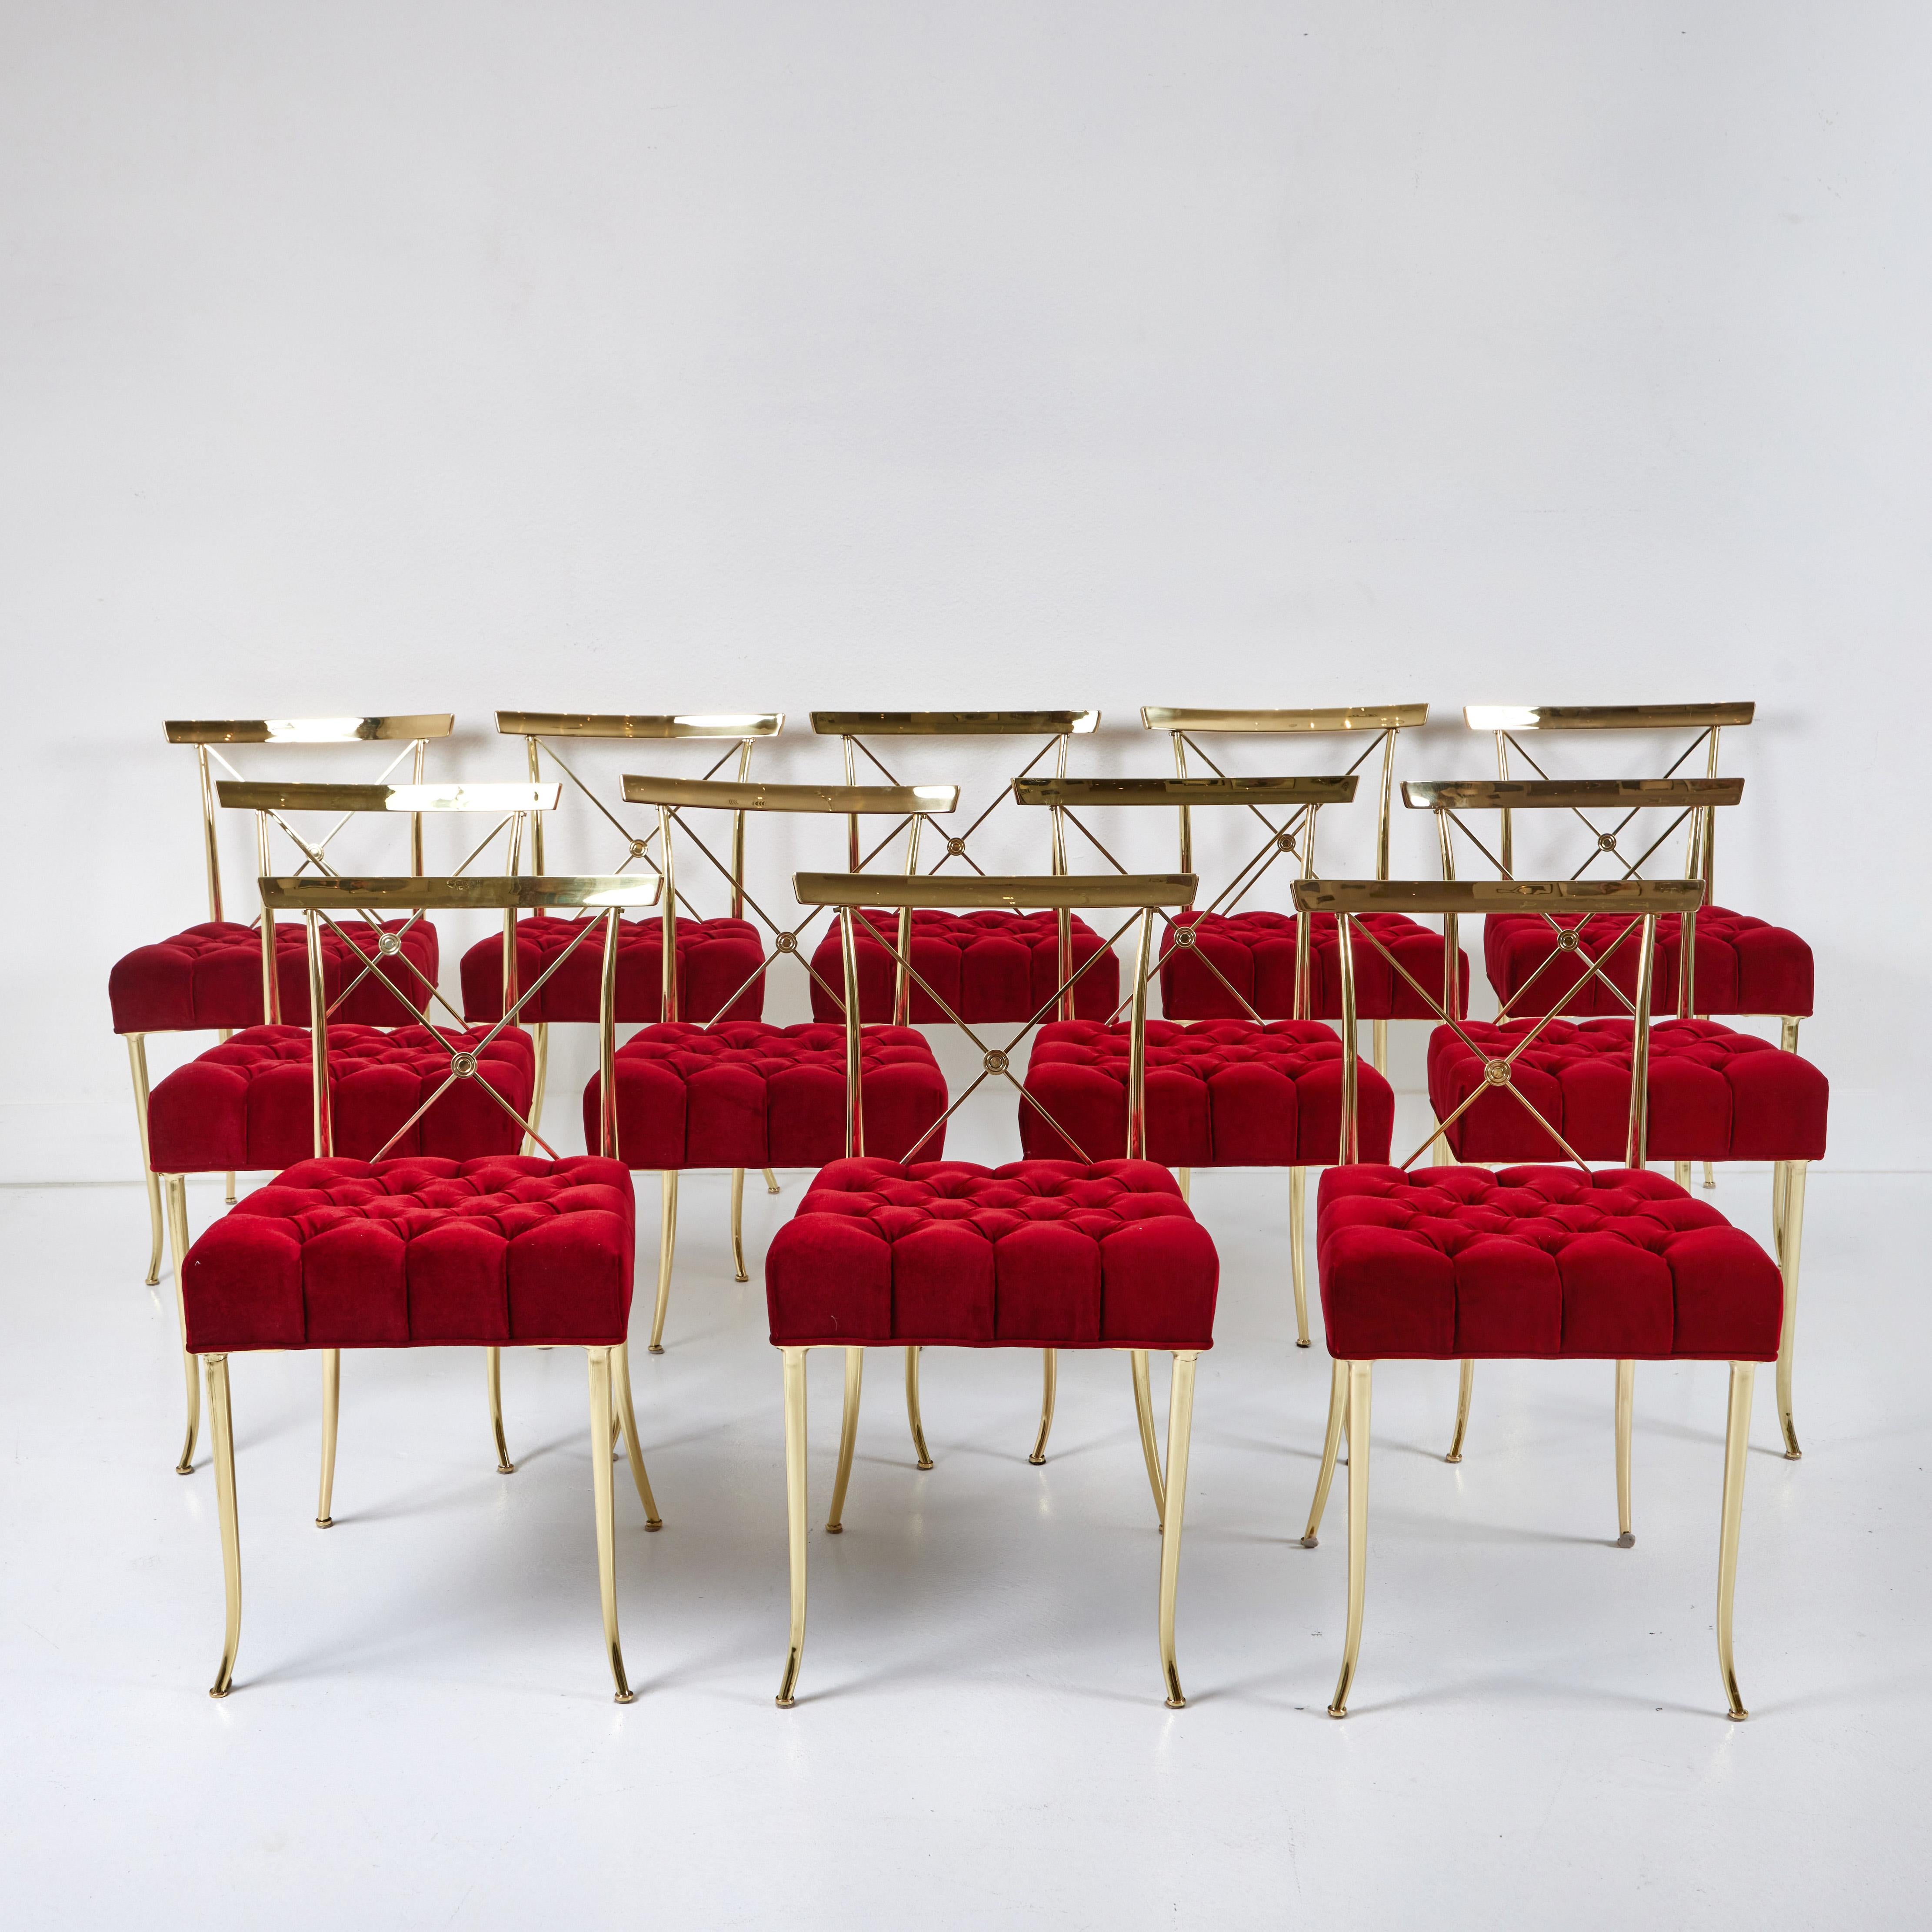 These 8 X back dining chairs have been completely restored. The chairs were taken apart and all the brass elements were wheel polished then clear coated to prevent tarnish. The gleaming chairs feature a graceful kicked front leg as well as a stylish